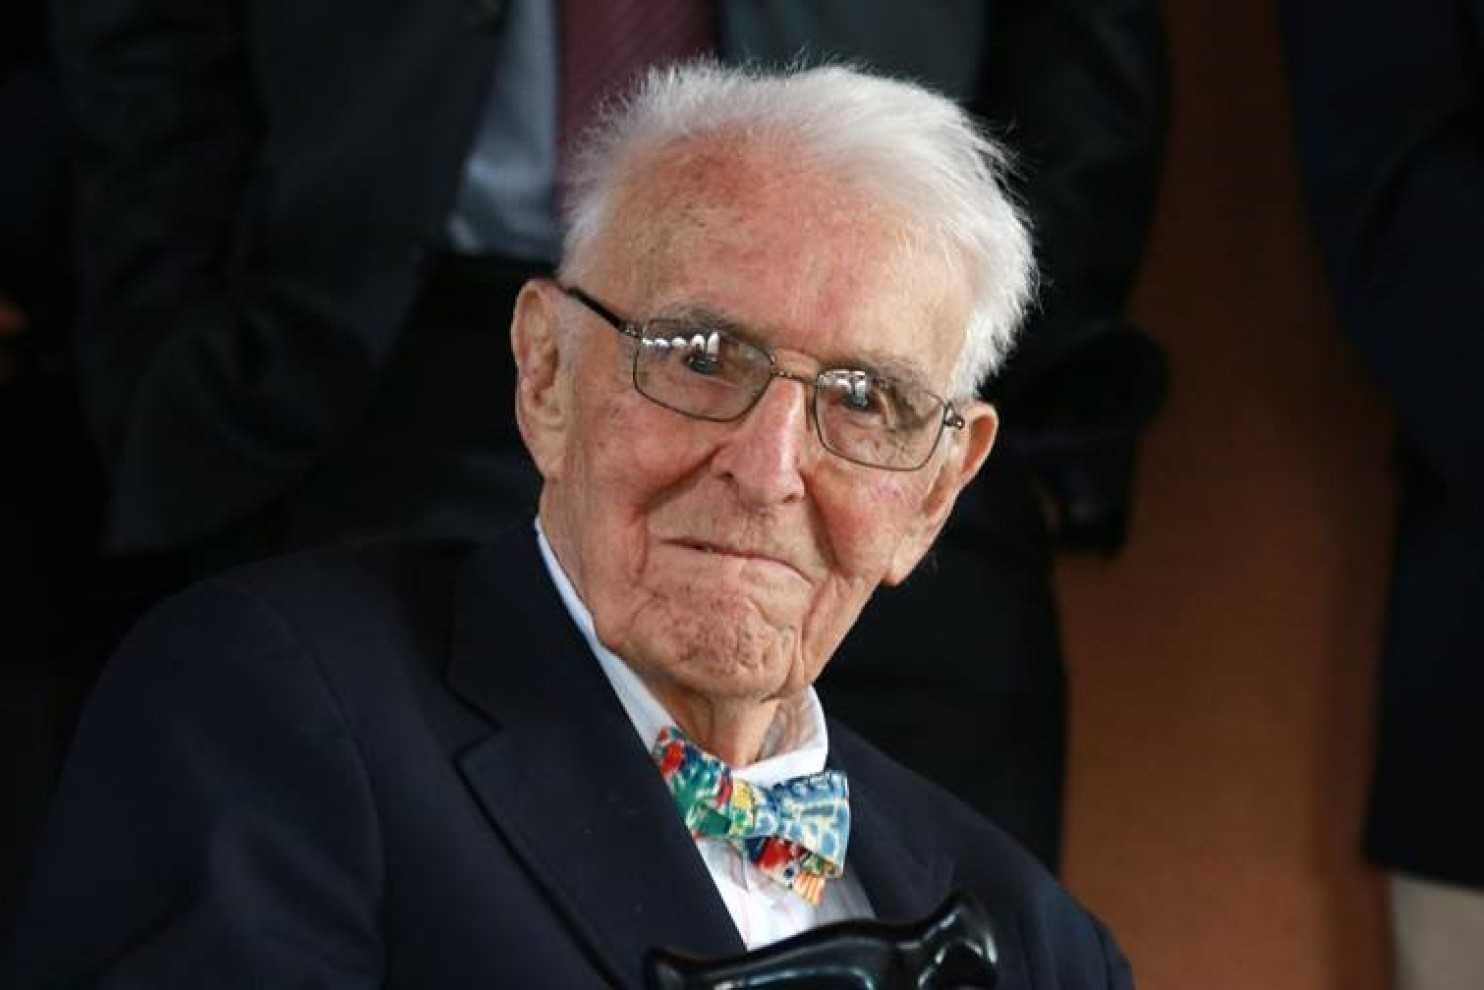 An older Fisher Howe with glasses, a suite, and bow tie looking at the camera.